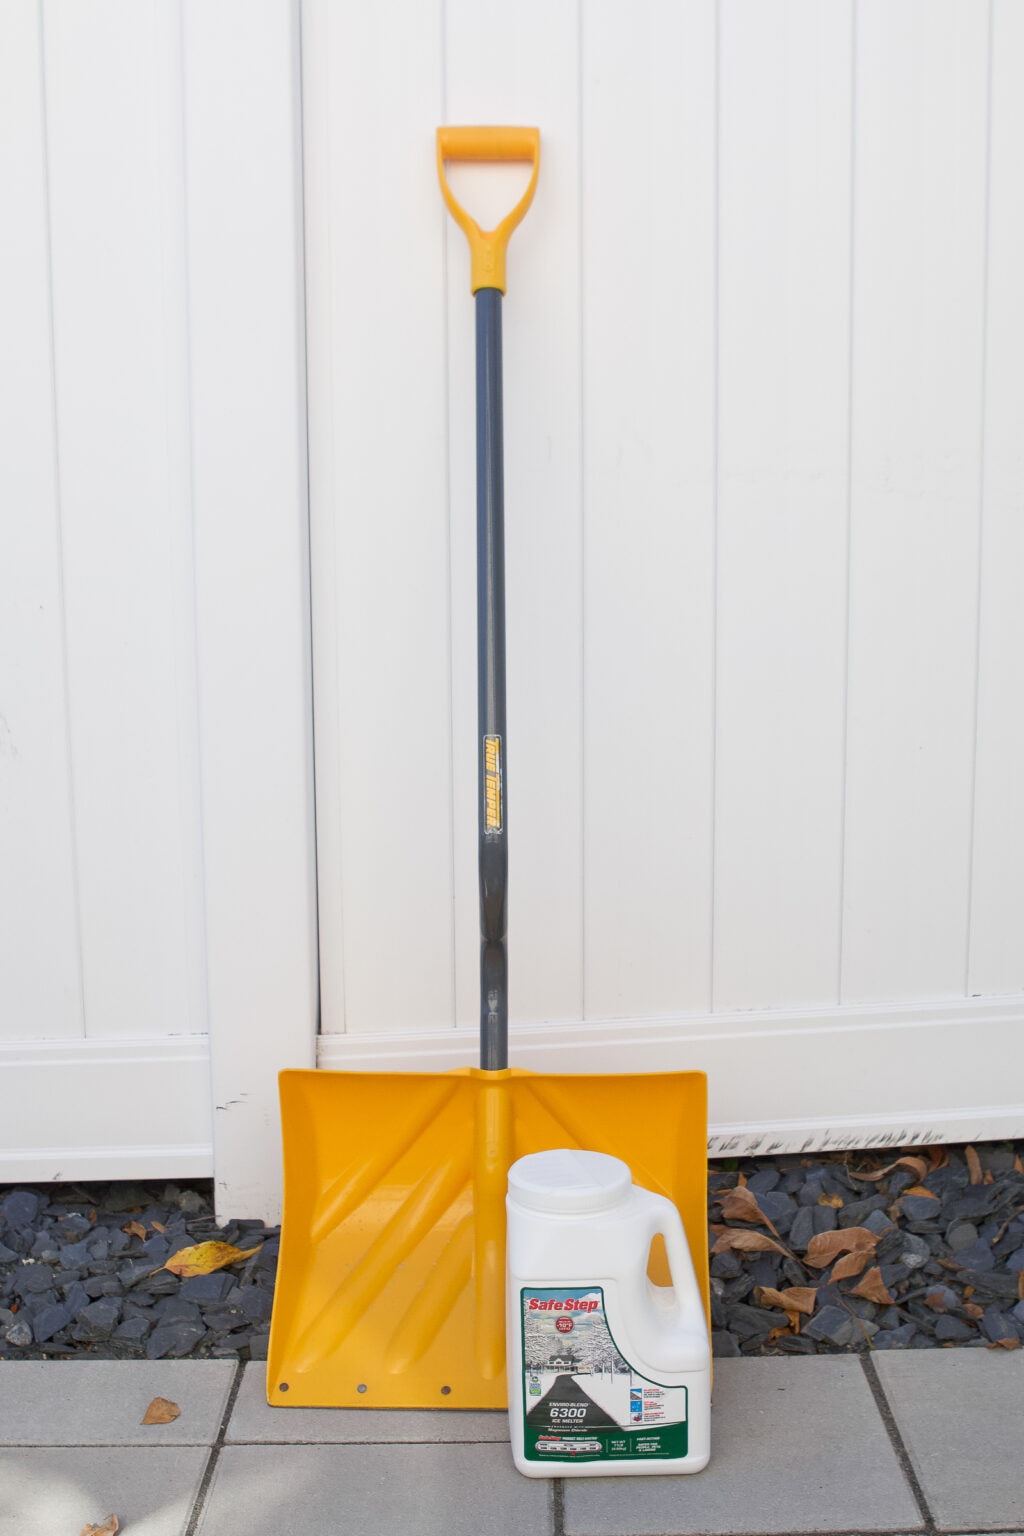 To prep your backyard for winter, be sure to take inventory of your salt and snow shovels